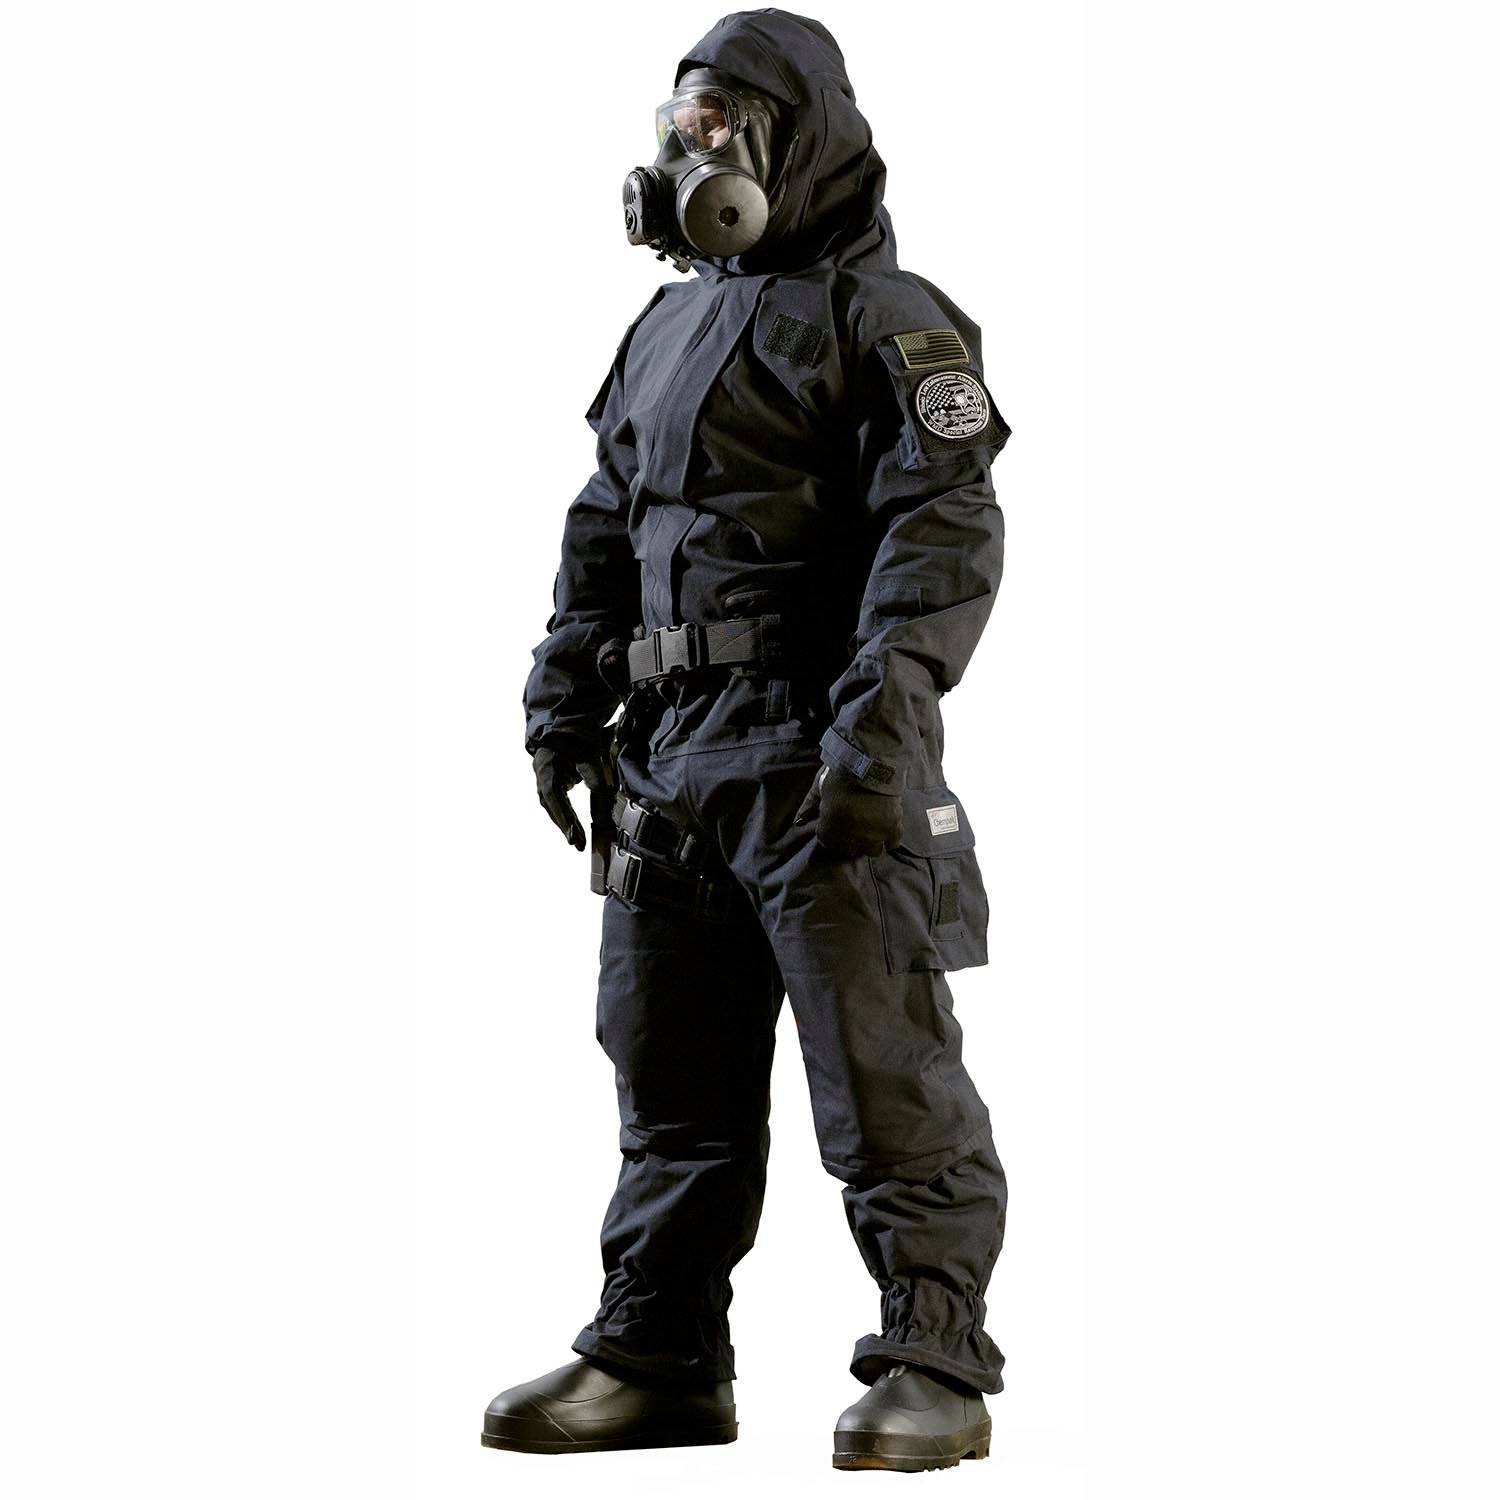 LION MT94 NFPA MOBILITY SUIT WITH REMOVEABLE GLOVES